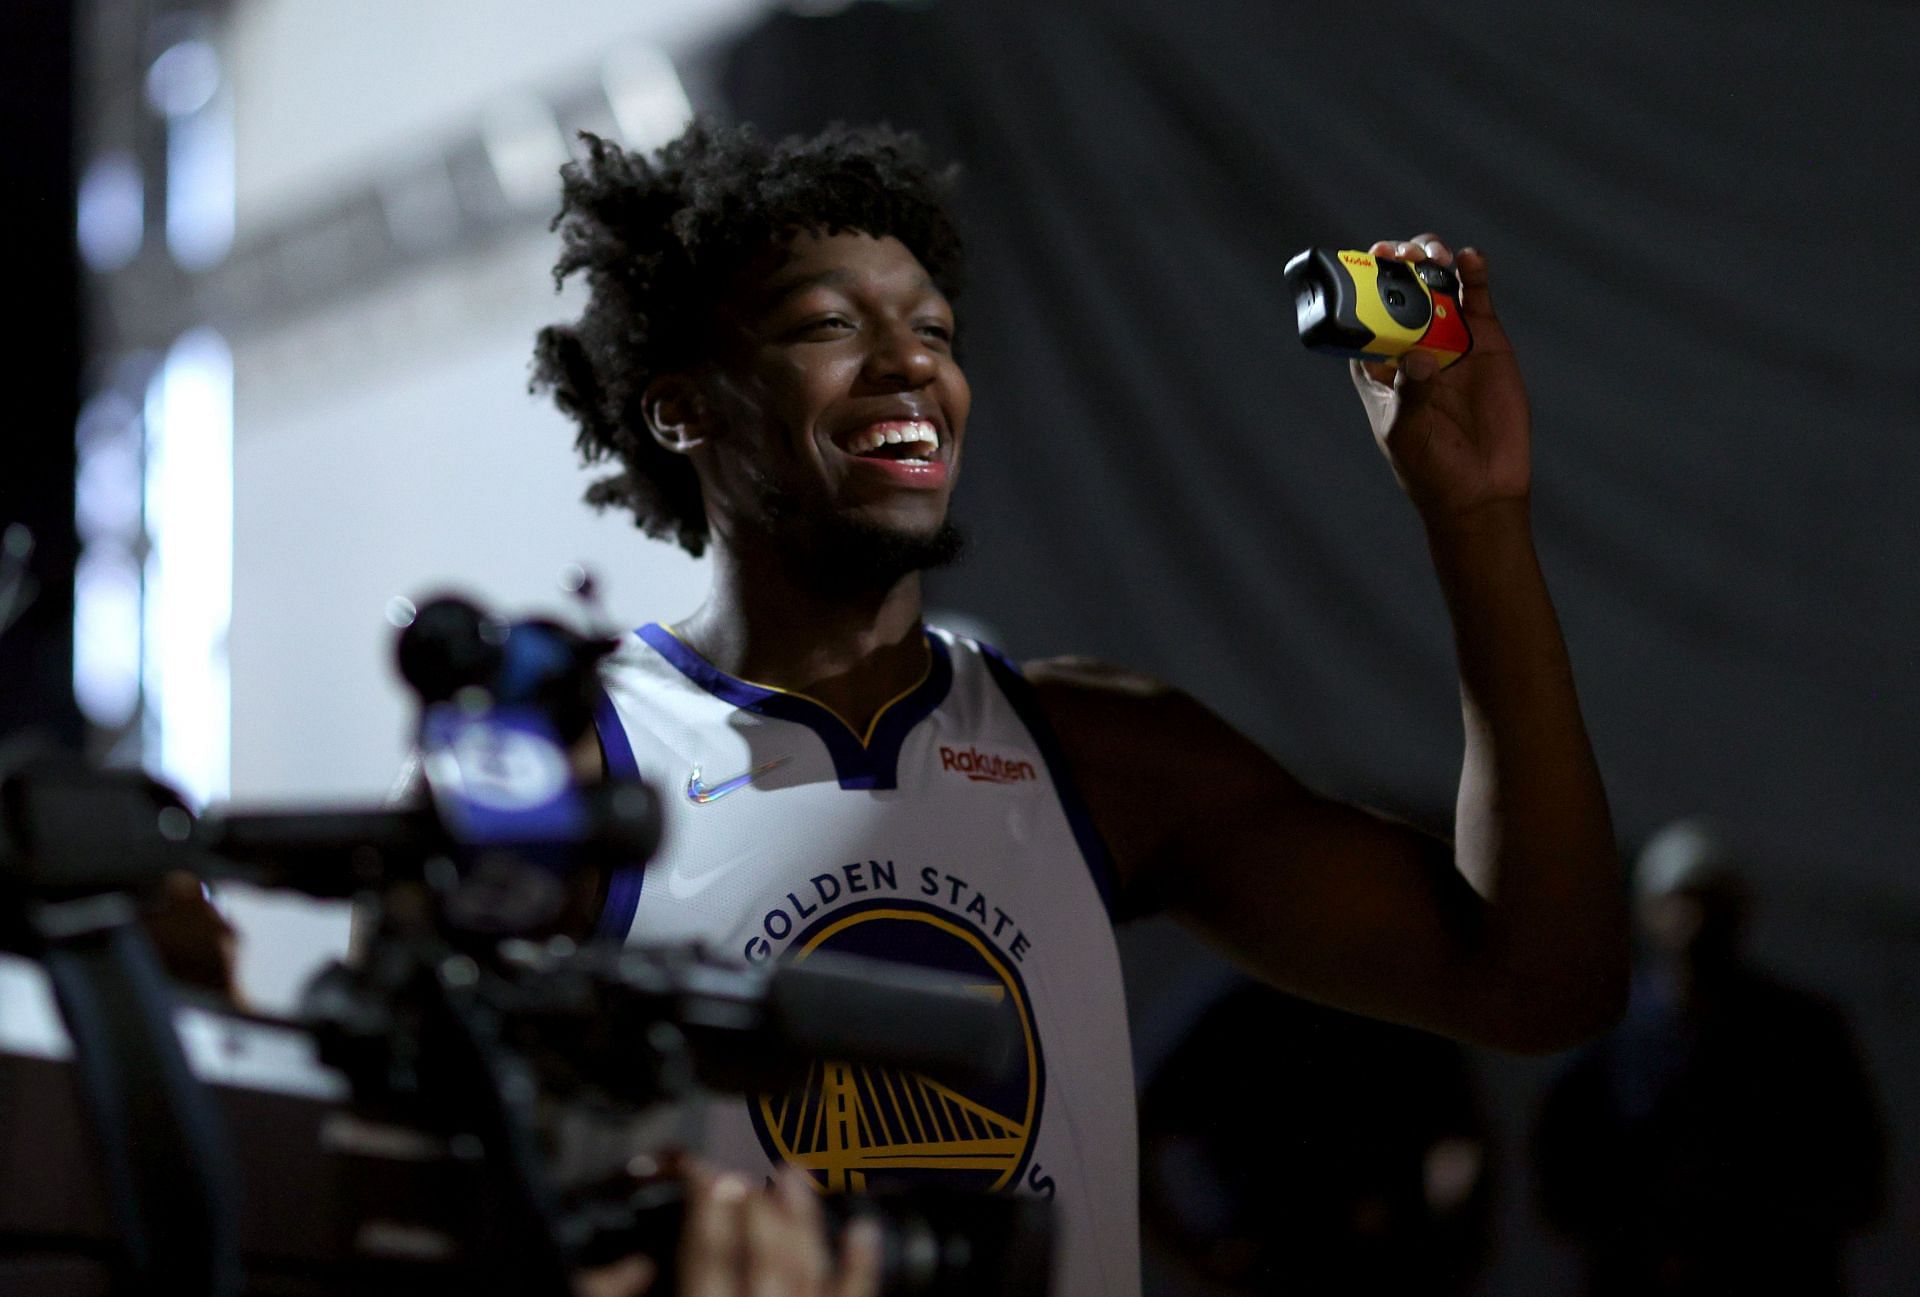 James Wiseman #33 of the Golden State Warriors takes a picture with a disposal camera during the Golden State Warriors Media Day at Chase Center on September 27, 2021 in San Francisco, California.